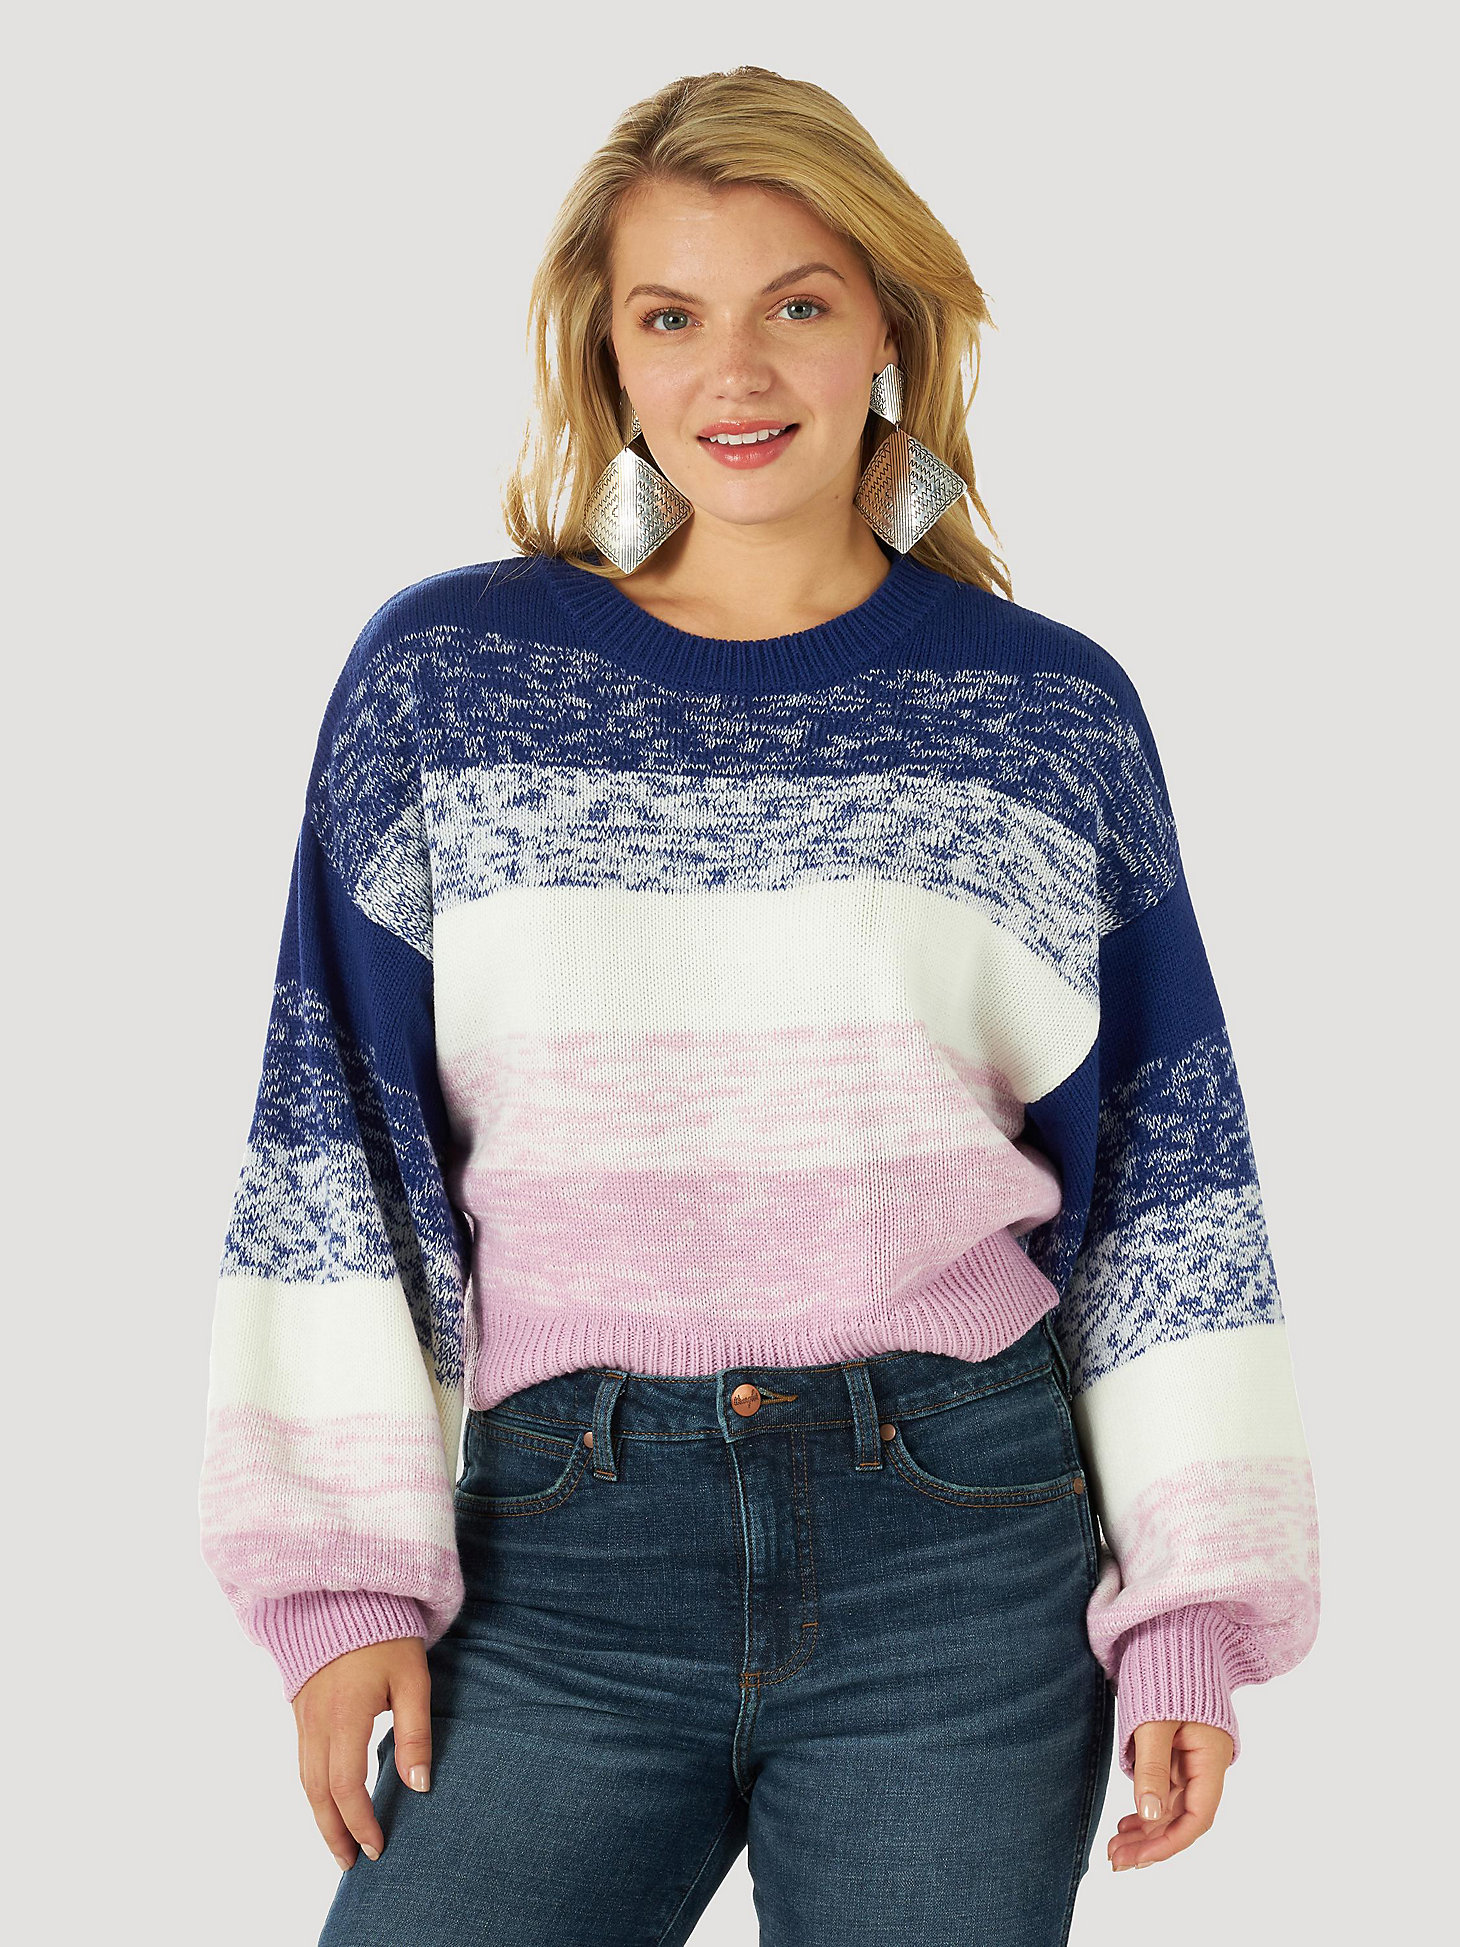 Women's Wrangler Retro® Balloon Sleeve Heathered Ombre Sweater in blue ombre main view